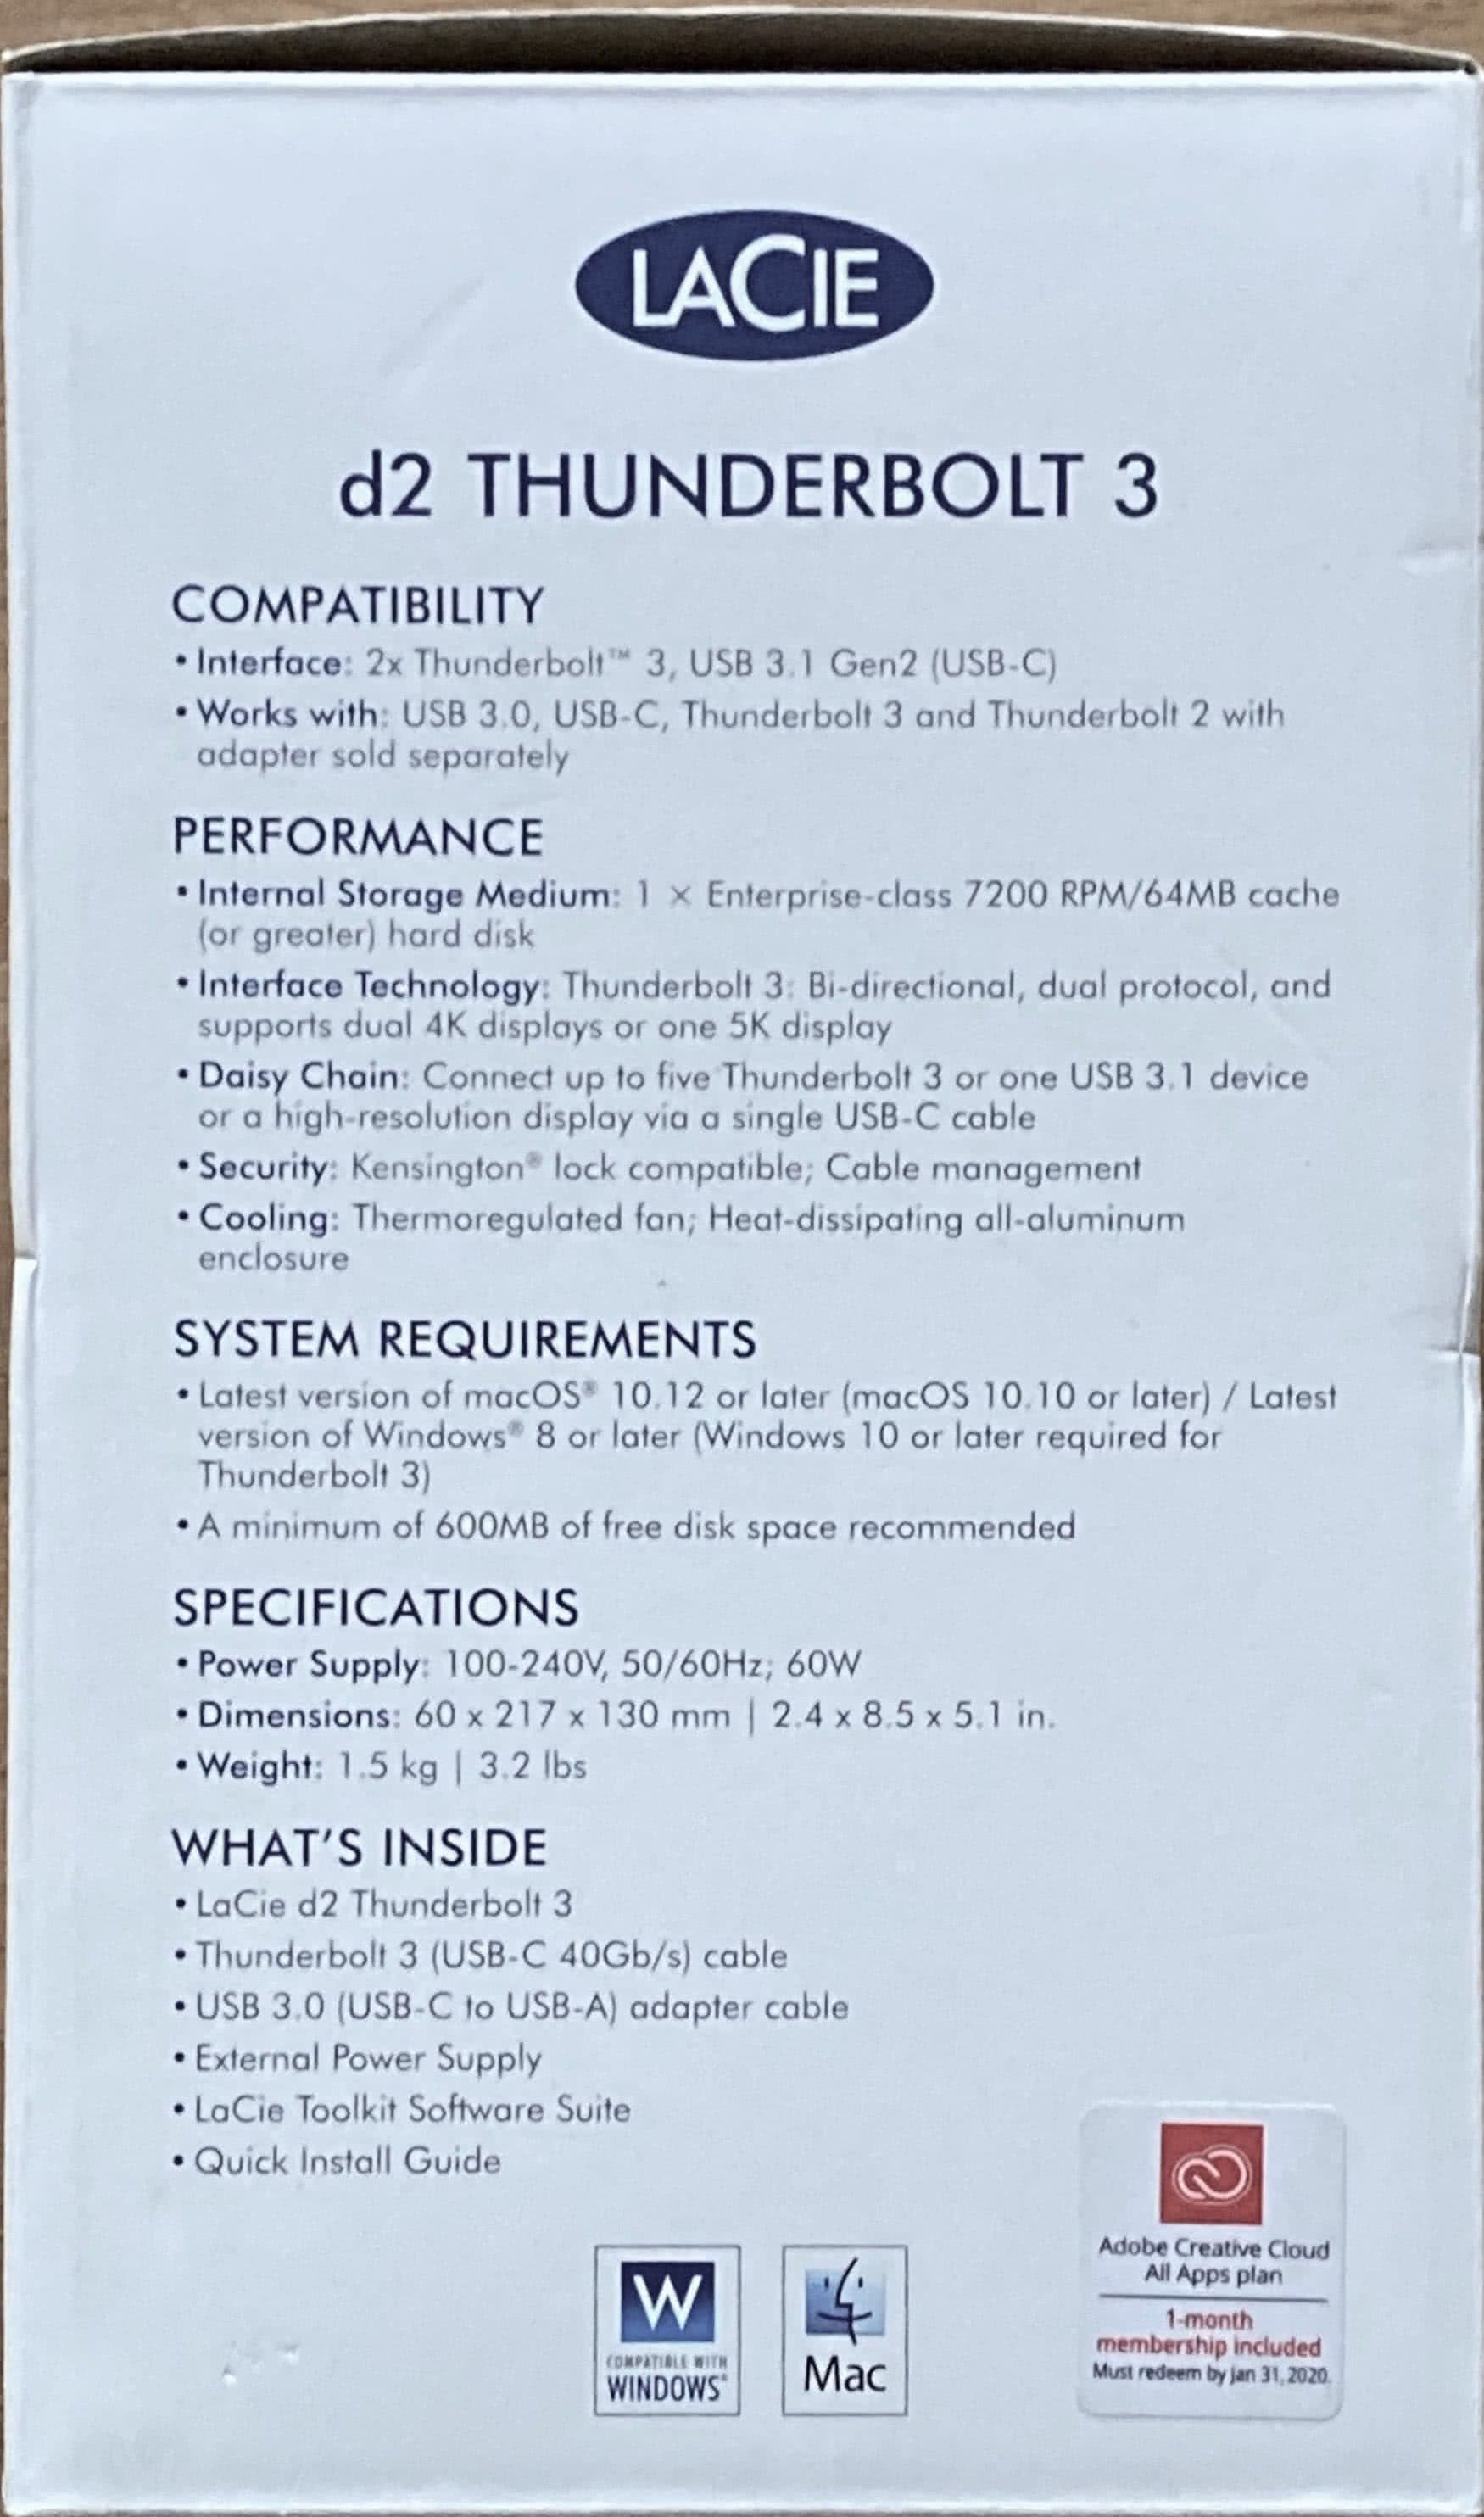 Photo: Original LaCie d2 Thunderbolt 3 box, box page describes technical specifications, system requirements and box contents.